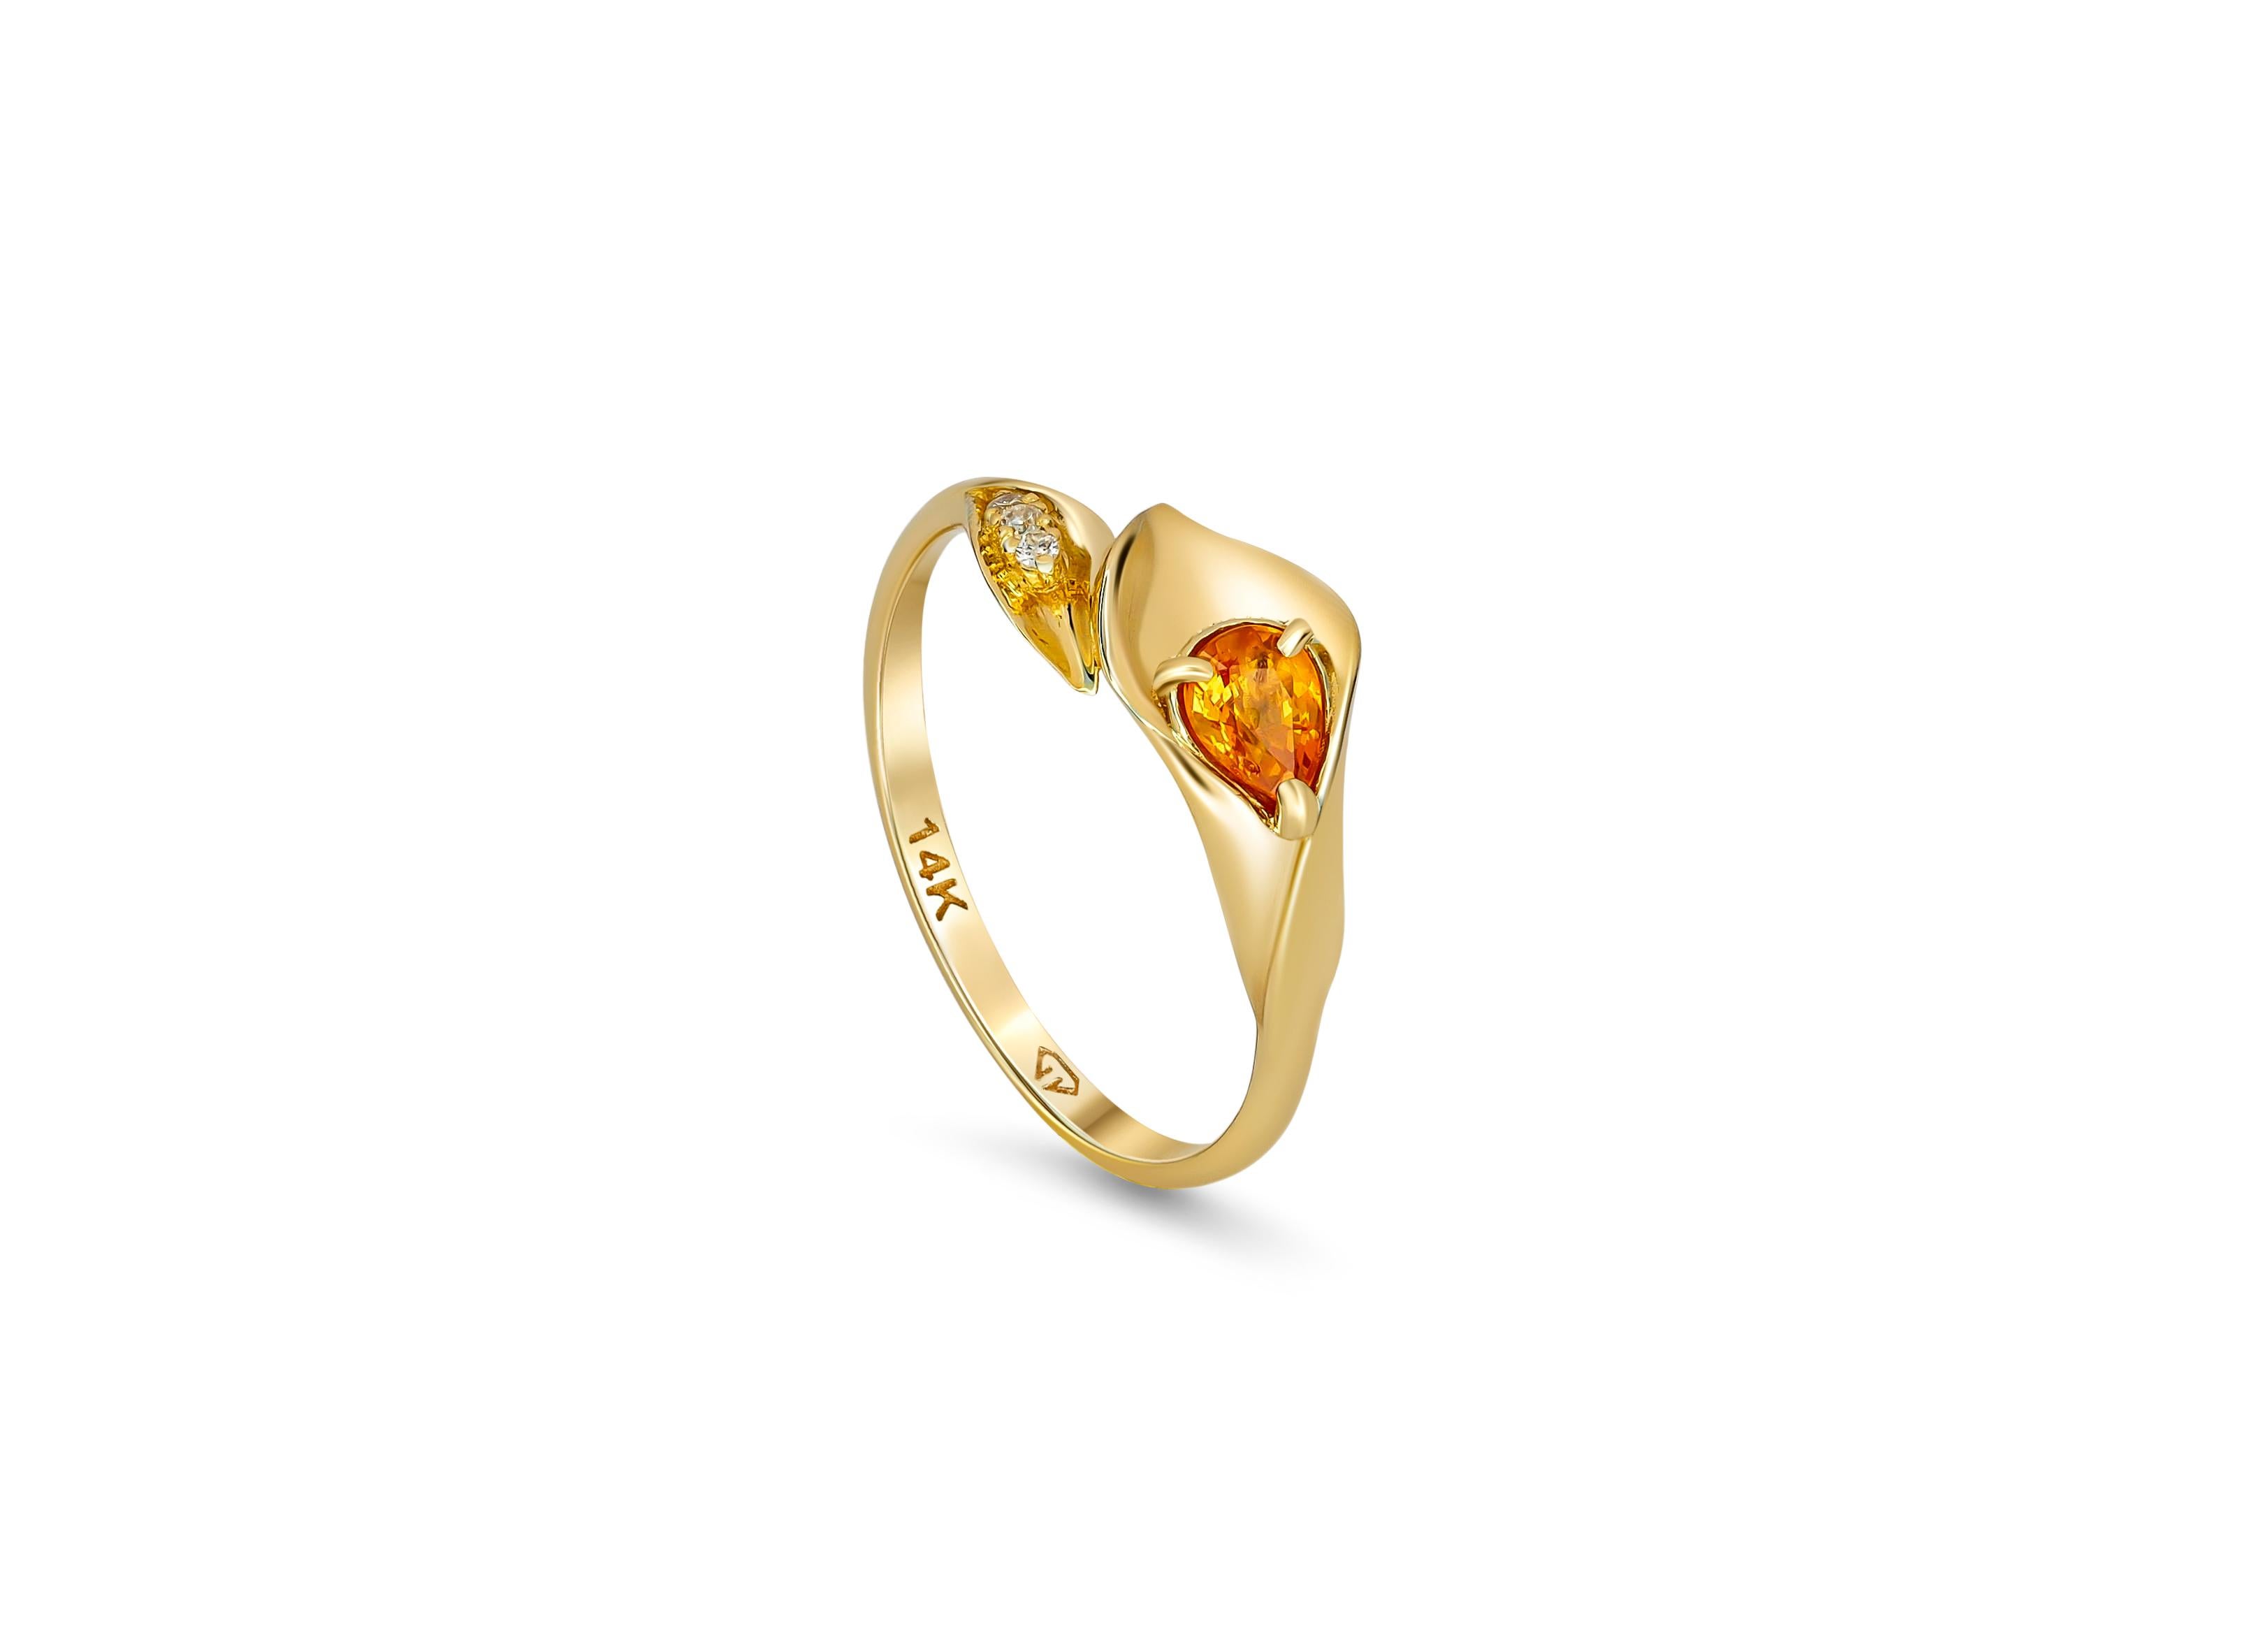 Lily calla gold ring. 
14 kt gold ring with sapphire and diamonds. Pear sapphire gold ring. Flower gold ring. Yellow sapphire ring.

Metal: 14k gold
Weight: 1.8 g. depends from size.

Set with sapphire
Pear cut, 0.70 ct., yellow color
Clarity: